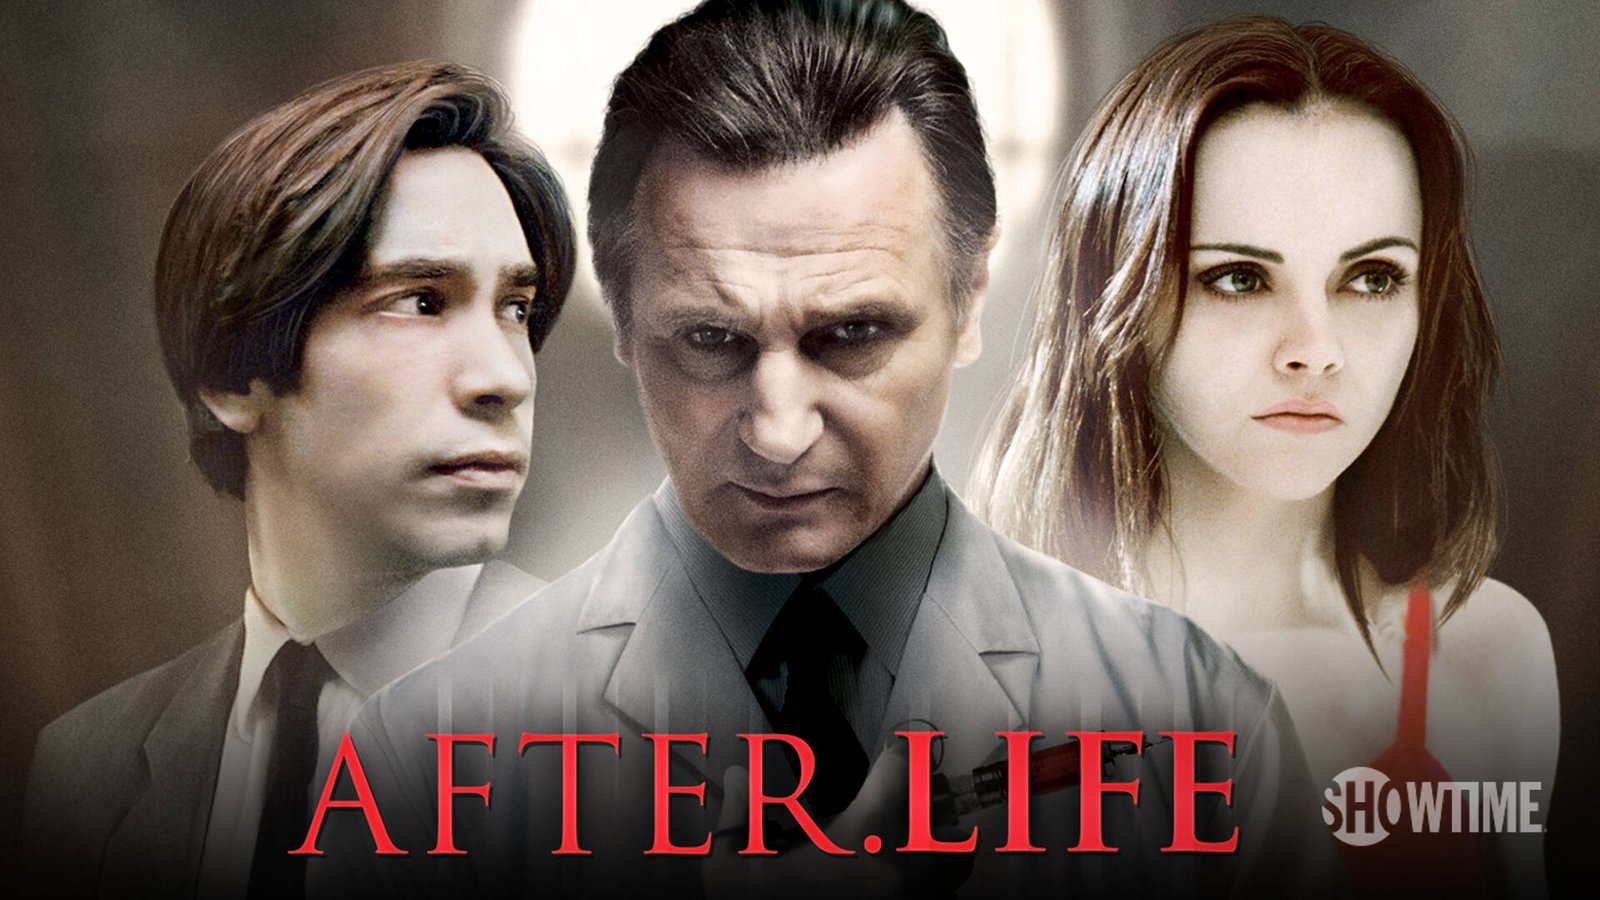 After.Life: Movie Plot Ending Explained